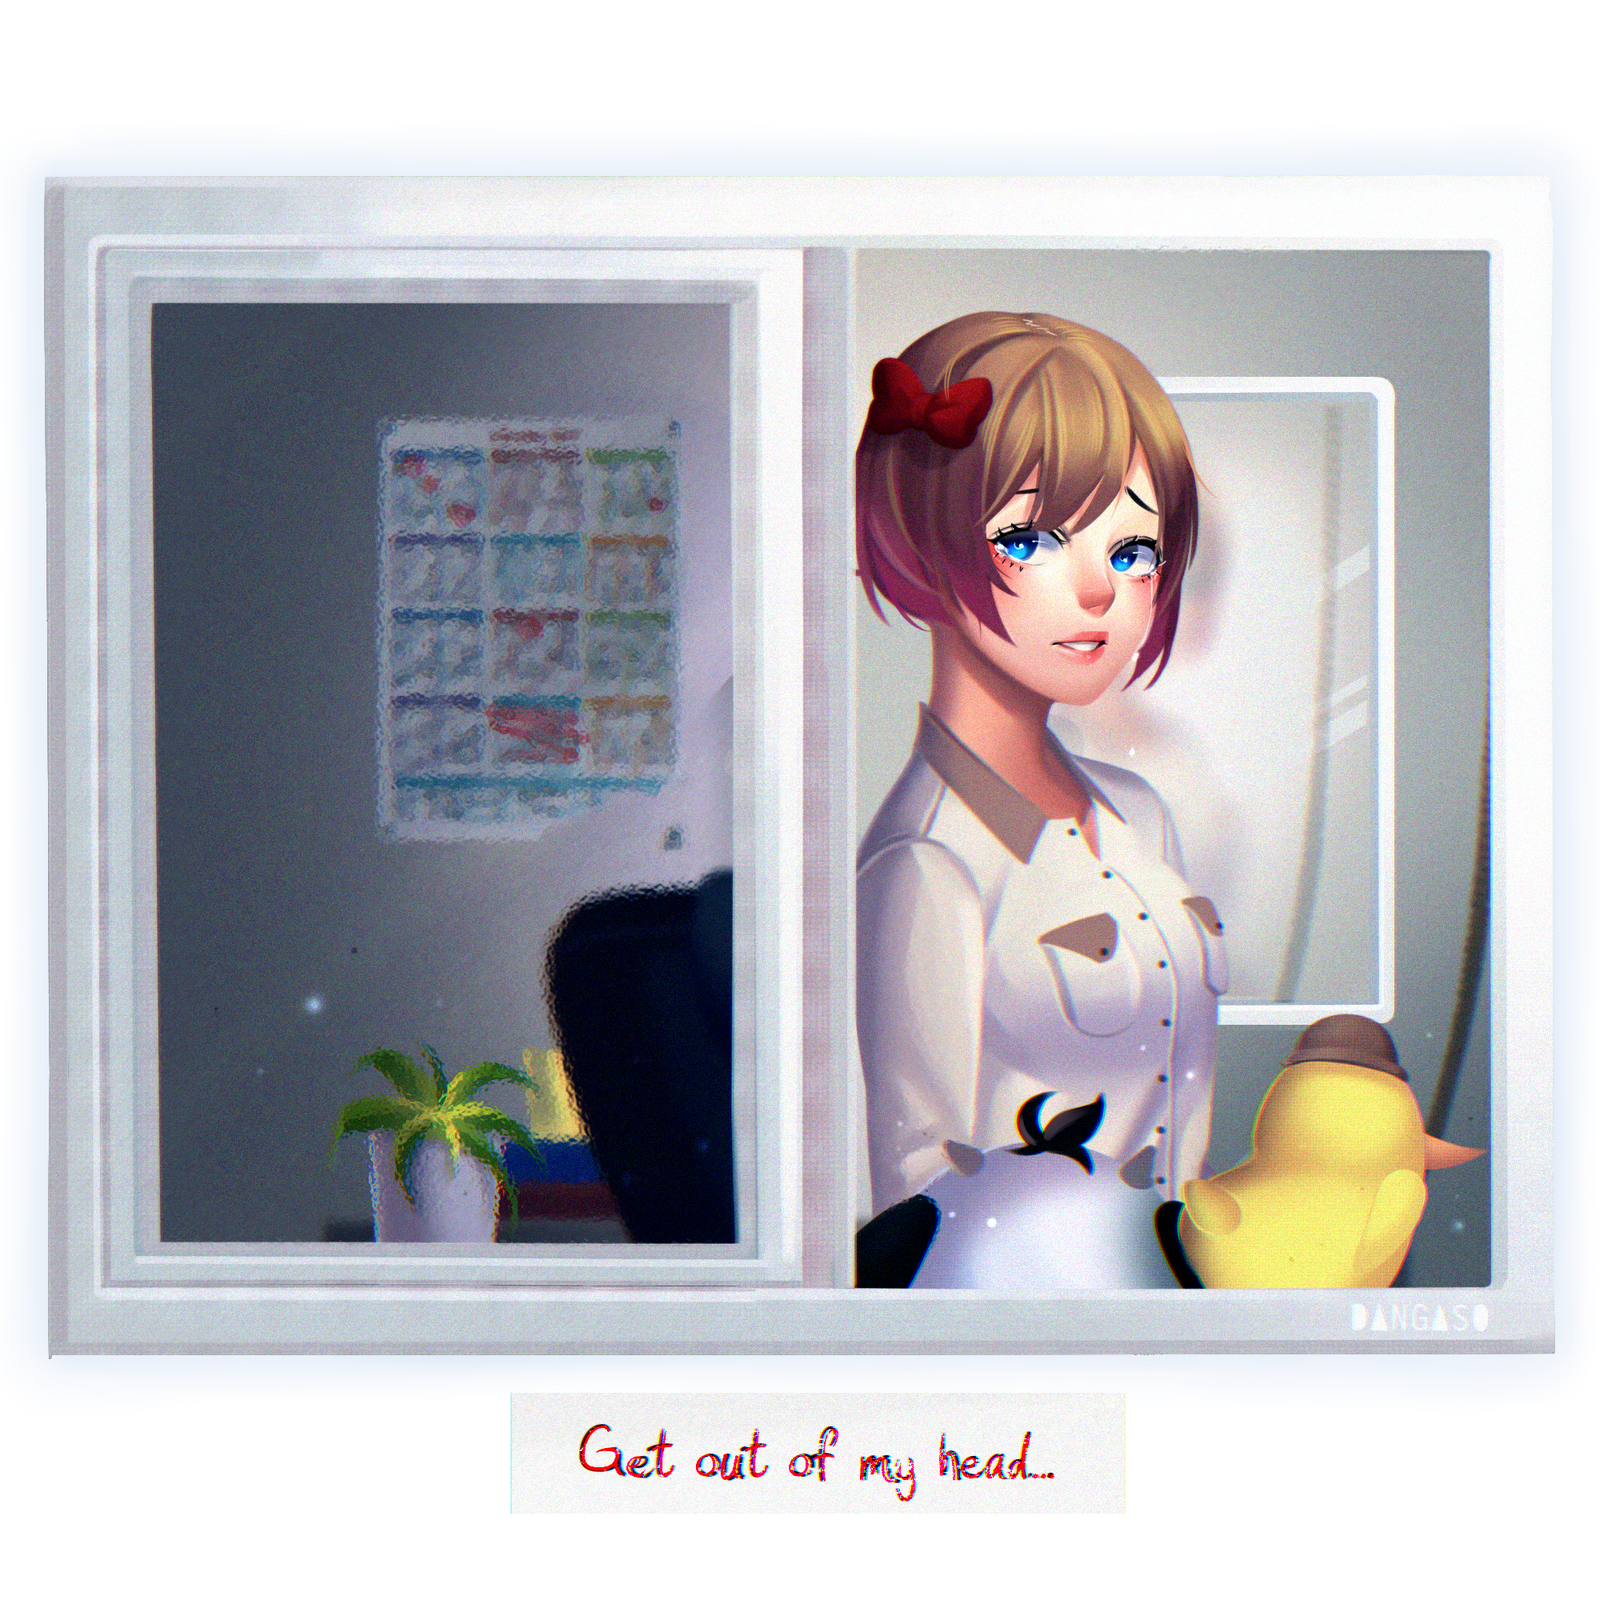 Can get out of my head перевод. Доки доки get out of my head. DDLC Sayori get out of my head. Стих Sayori get out of my head.